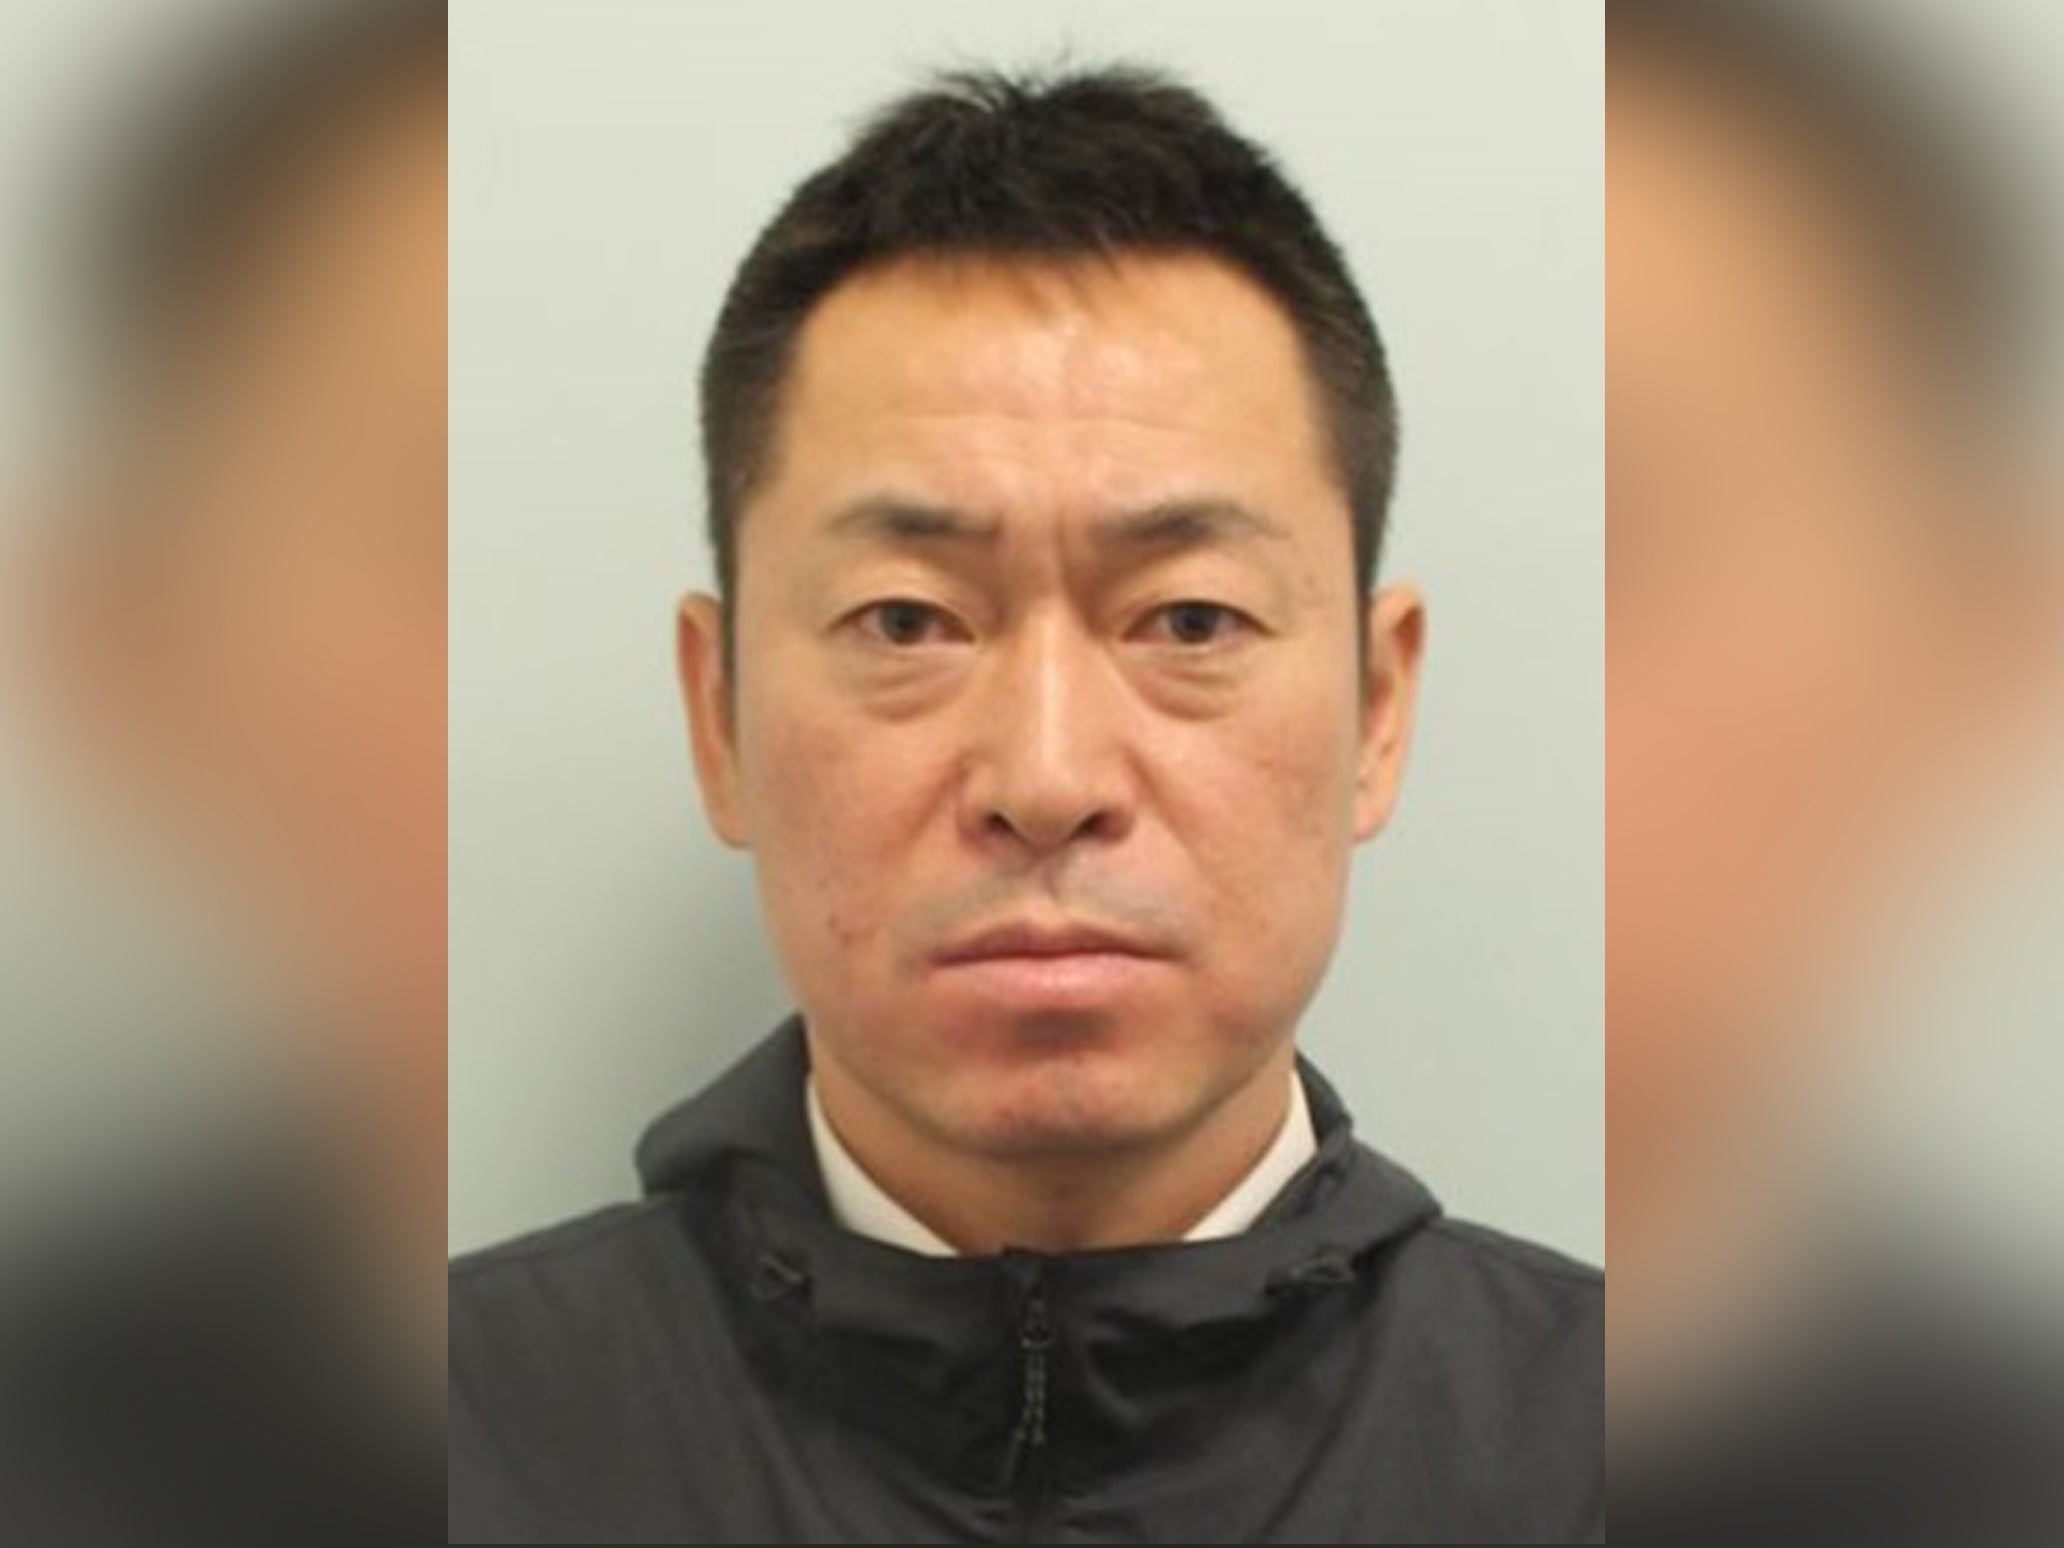 Katsutoshi Jitsukawa, who has been jailed for drunkenly attempting to fly a jet